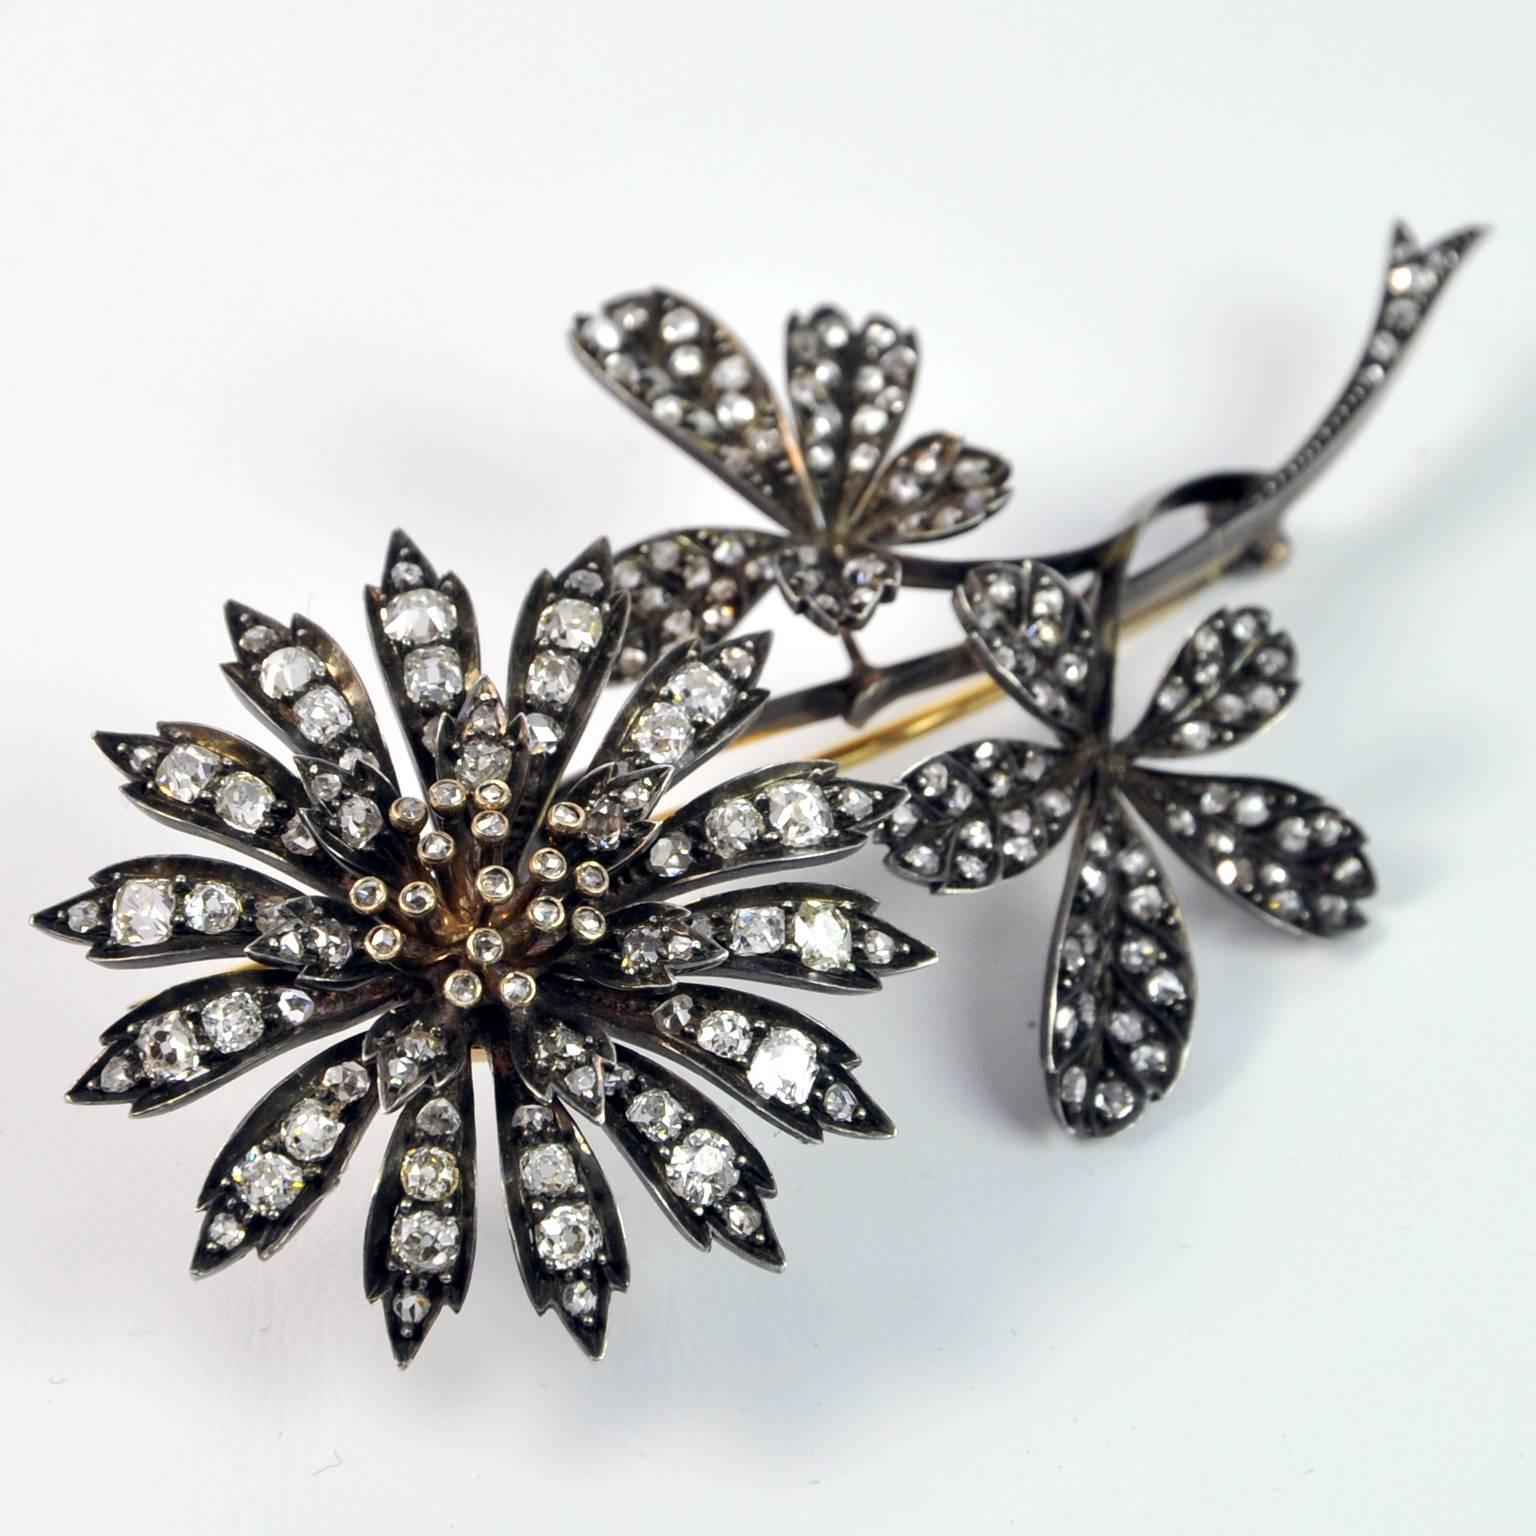 Victorian silver topped 18K gold floral design 'en tremblant' brooch set with old cushion and old rose cut diamonds.

French hallmarks, circa 1880.

Length 10 cm (4 in.) - Width ± 5.4 cm (2.1 in)
Diameter of the flower 4.5cm (1¾ in)